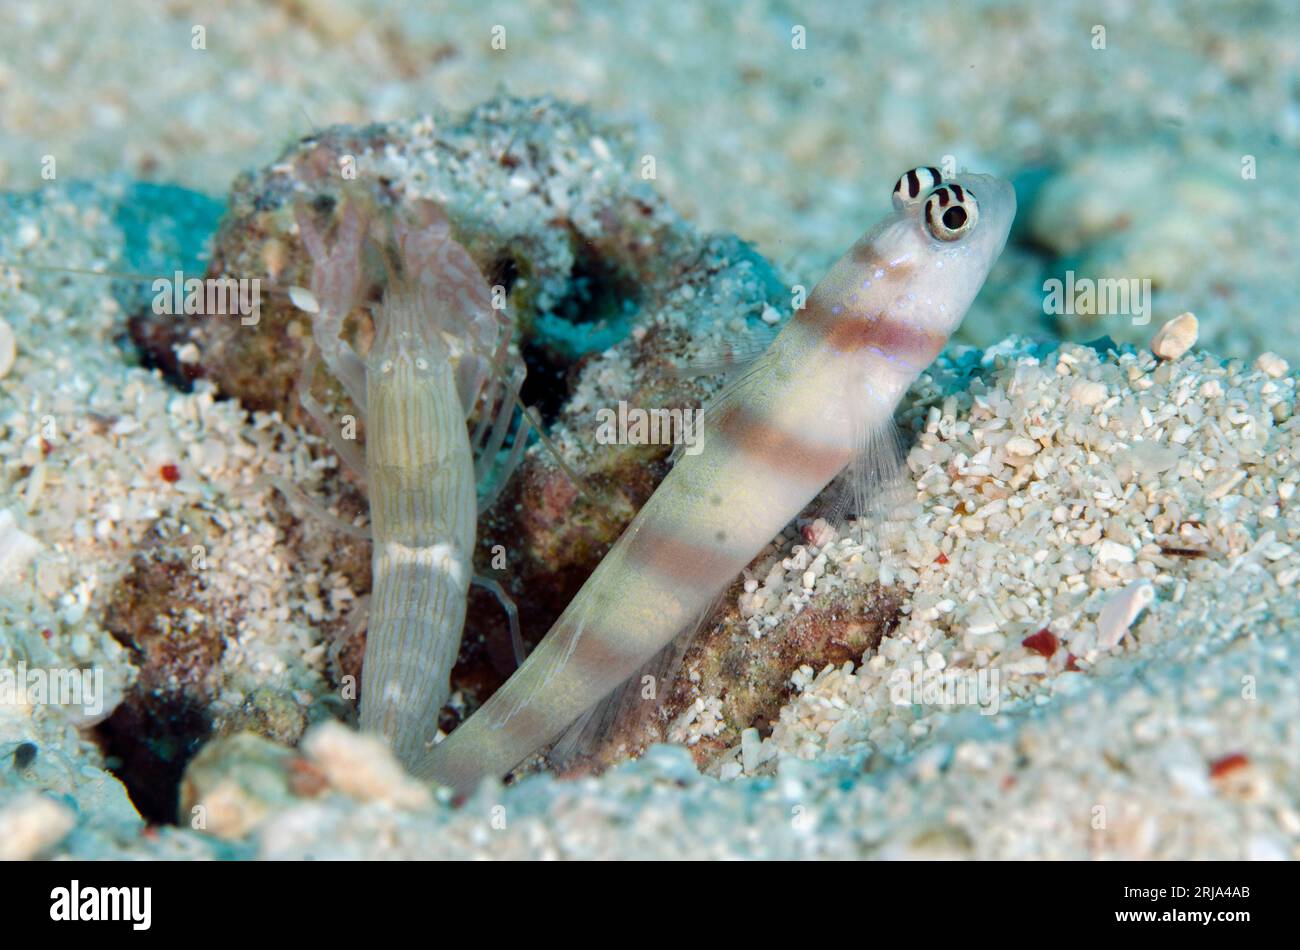 Narrow-barred Shrimpgoby, Amblyeleotris sp, and Snapping Shrimp, Alpheus sp, by hole, Pelican Reef dive site, Wuliaru Island, near Tanimbar, Forgotten Stock Photo